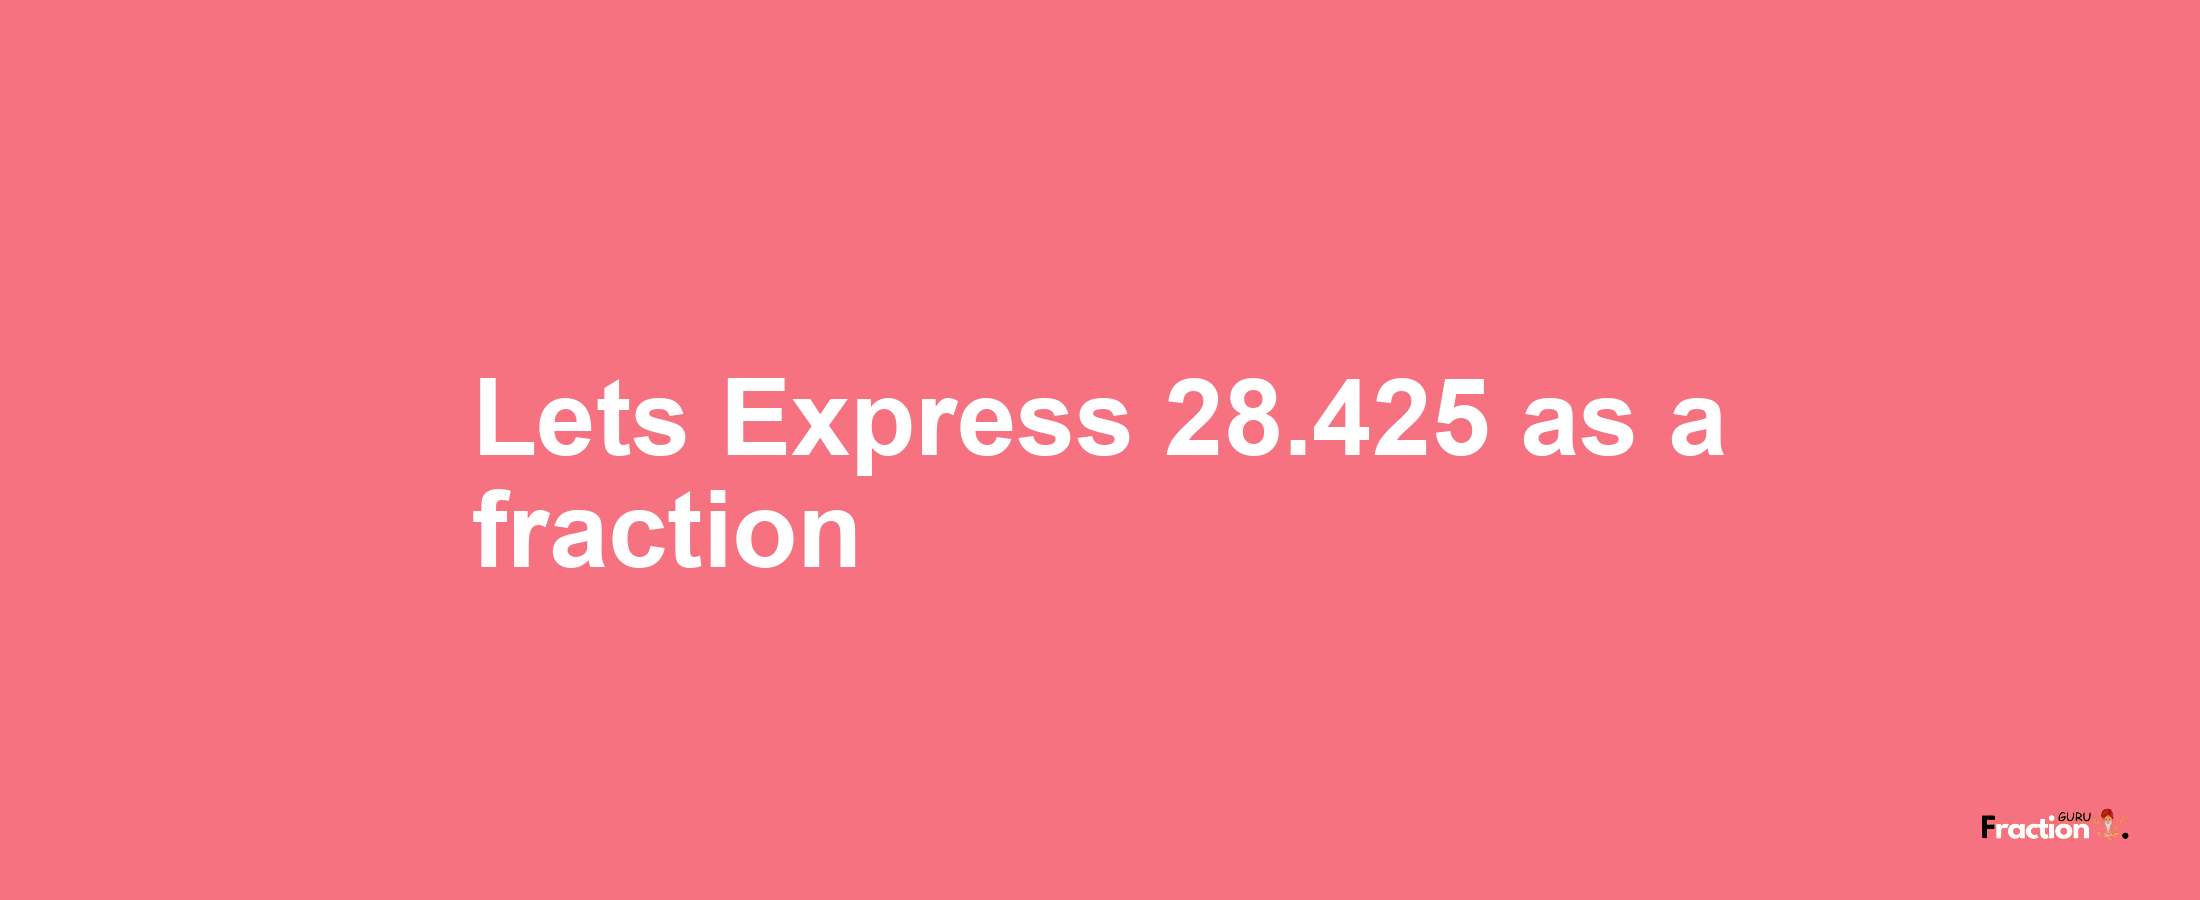 Lets Express 28.425 as afraction